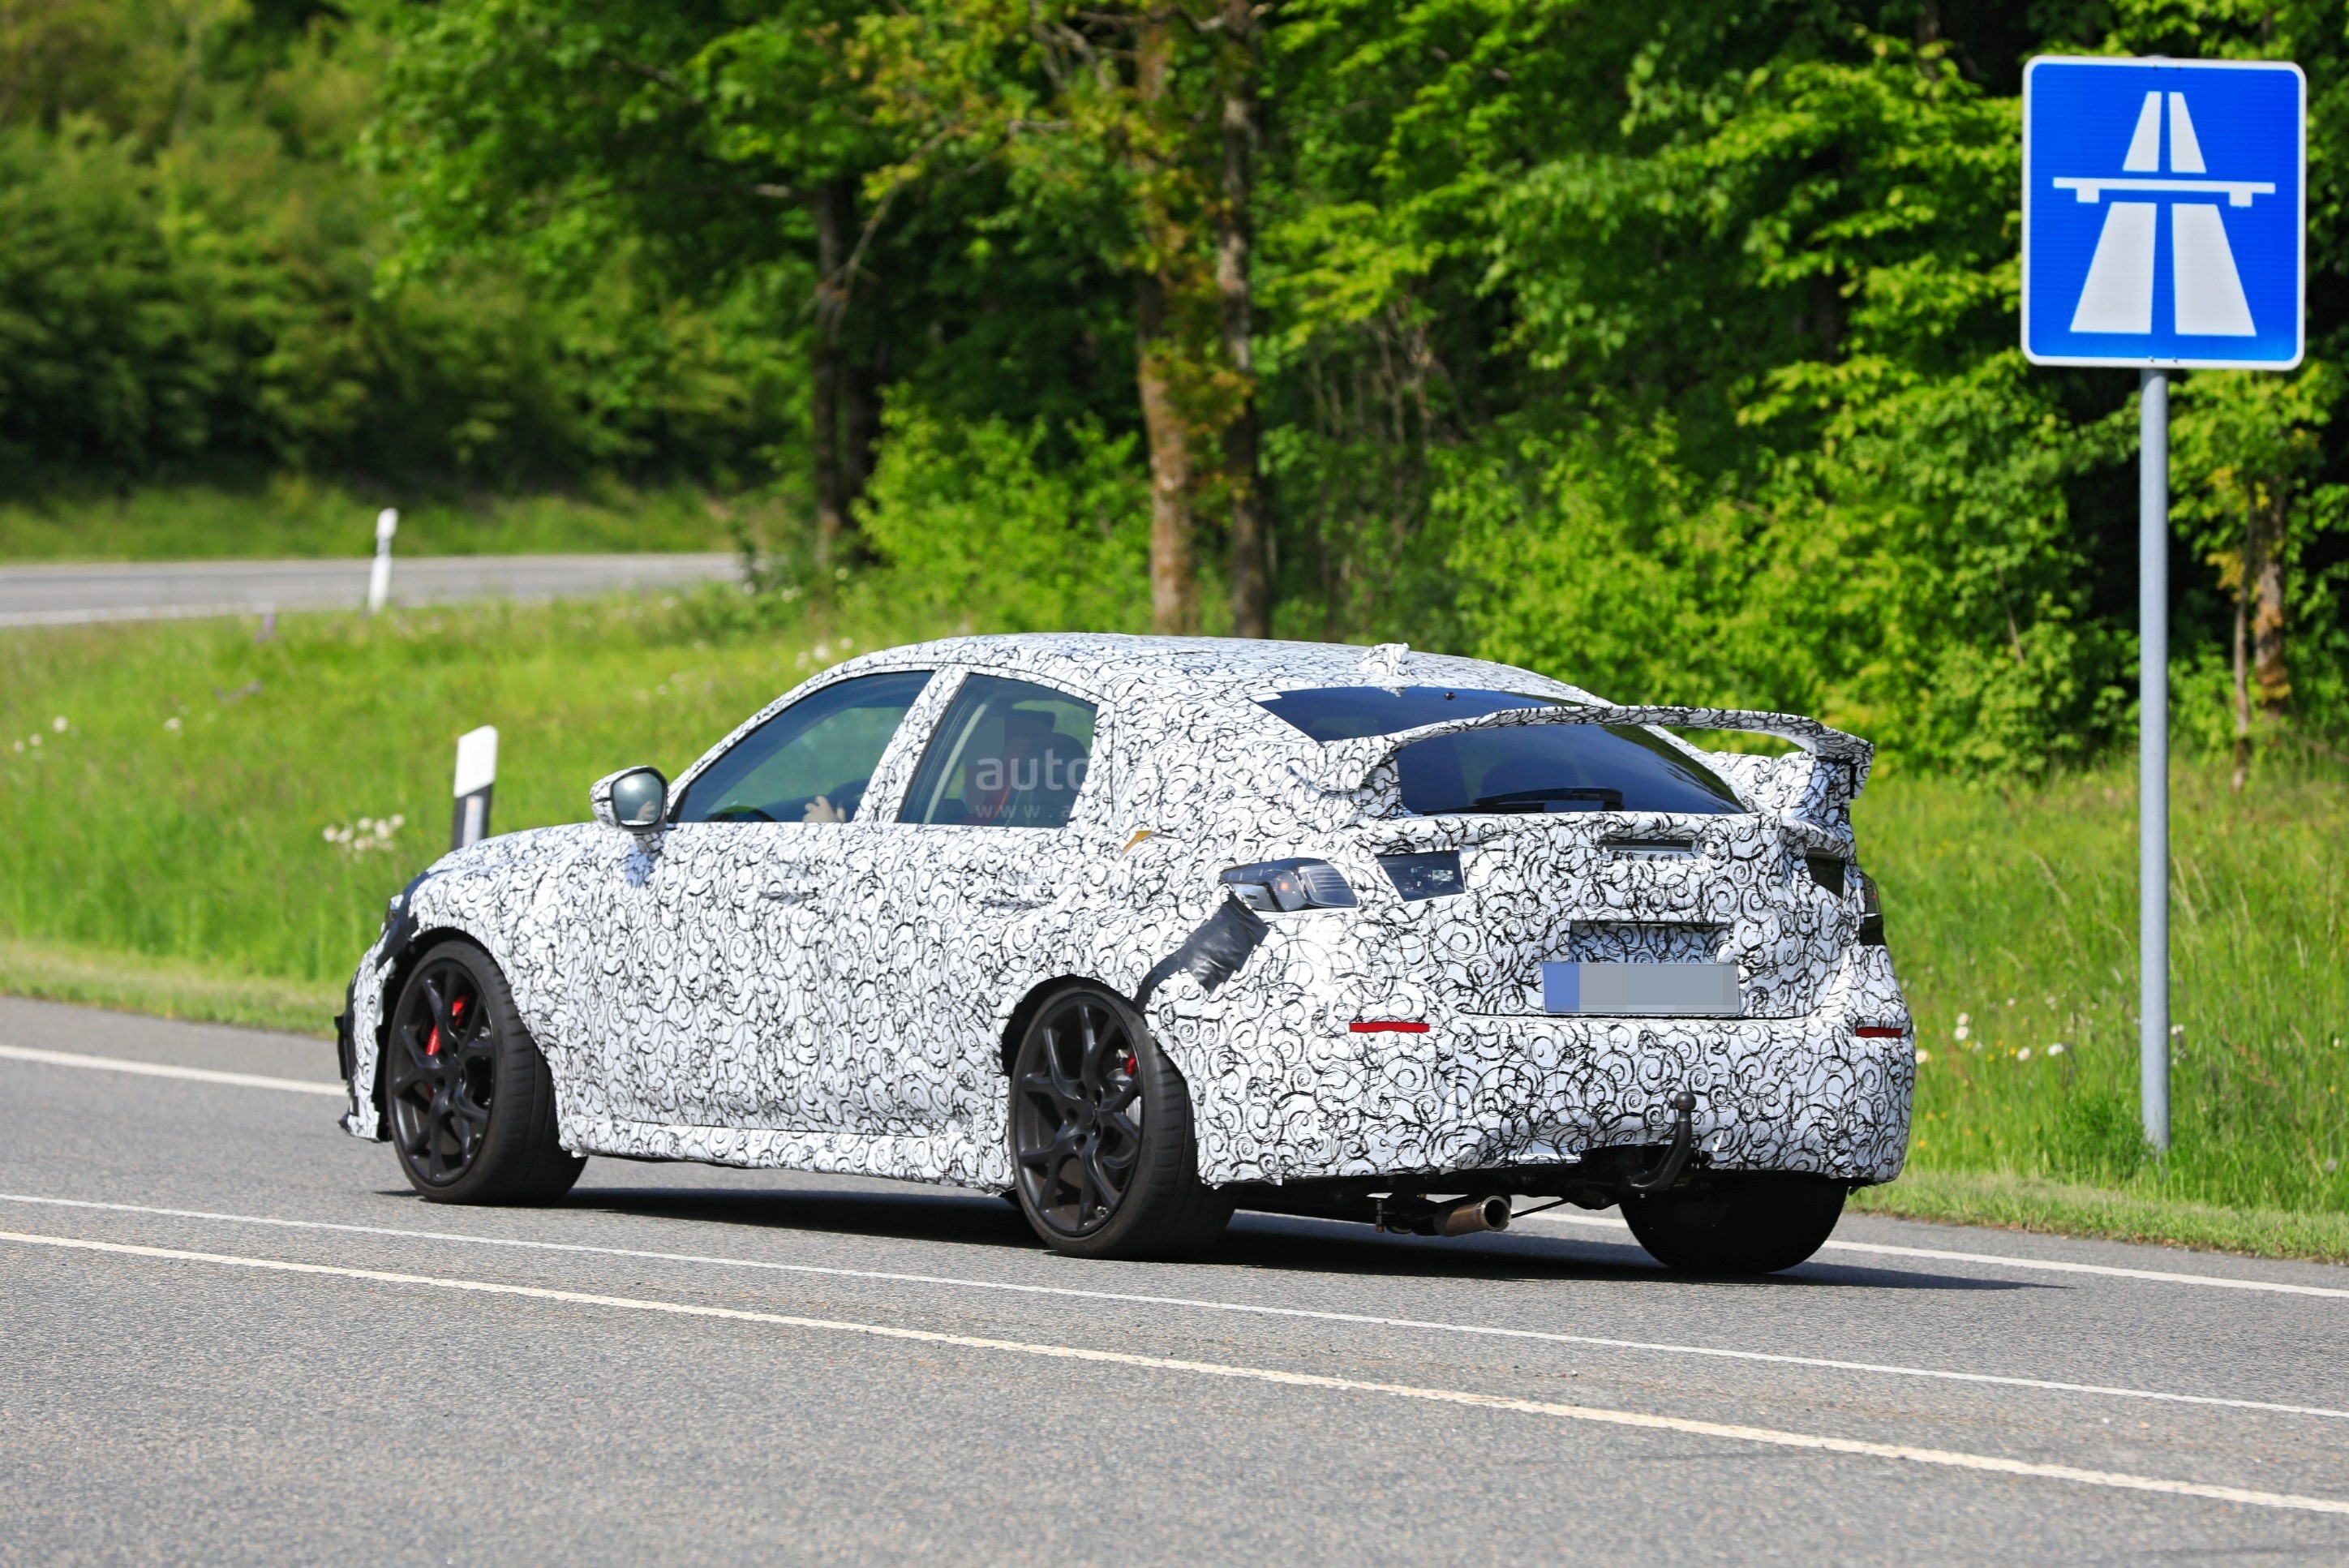 2022 Honda Civic Type R Spy Photos Preview the All-New ...